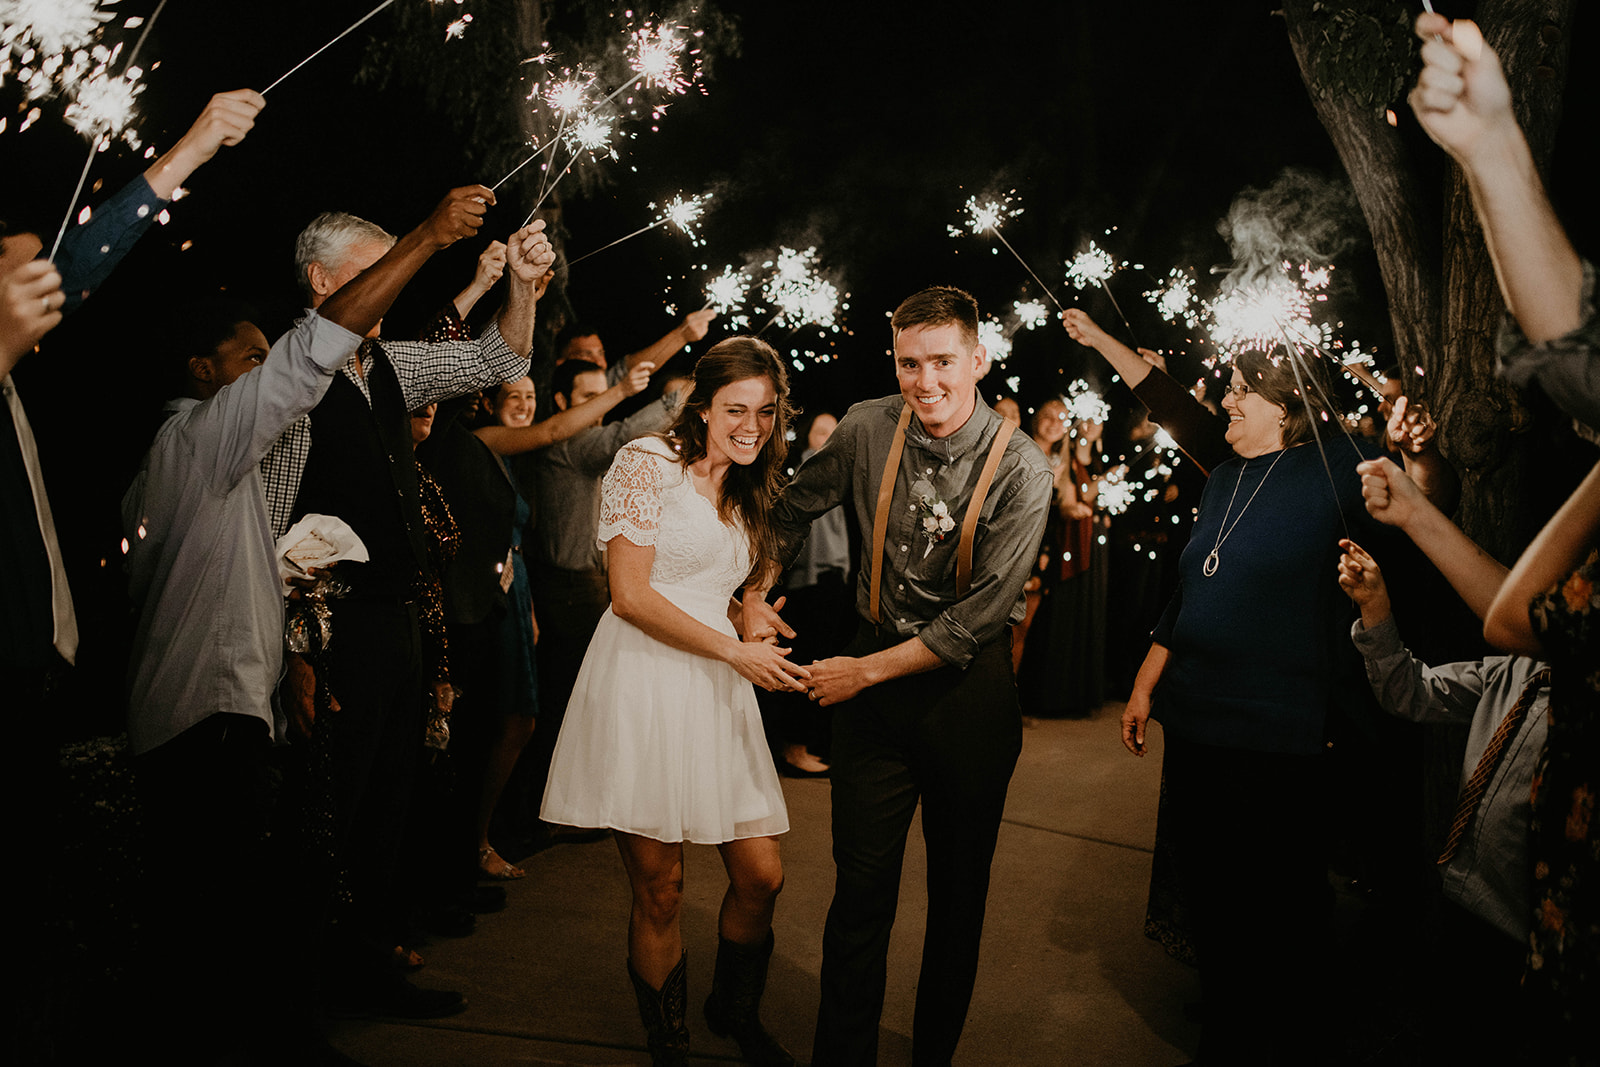 A young newlywed couple with sparklers says goodbye to guests at night, a beautiful end to the wedding day.